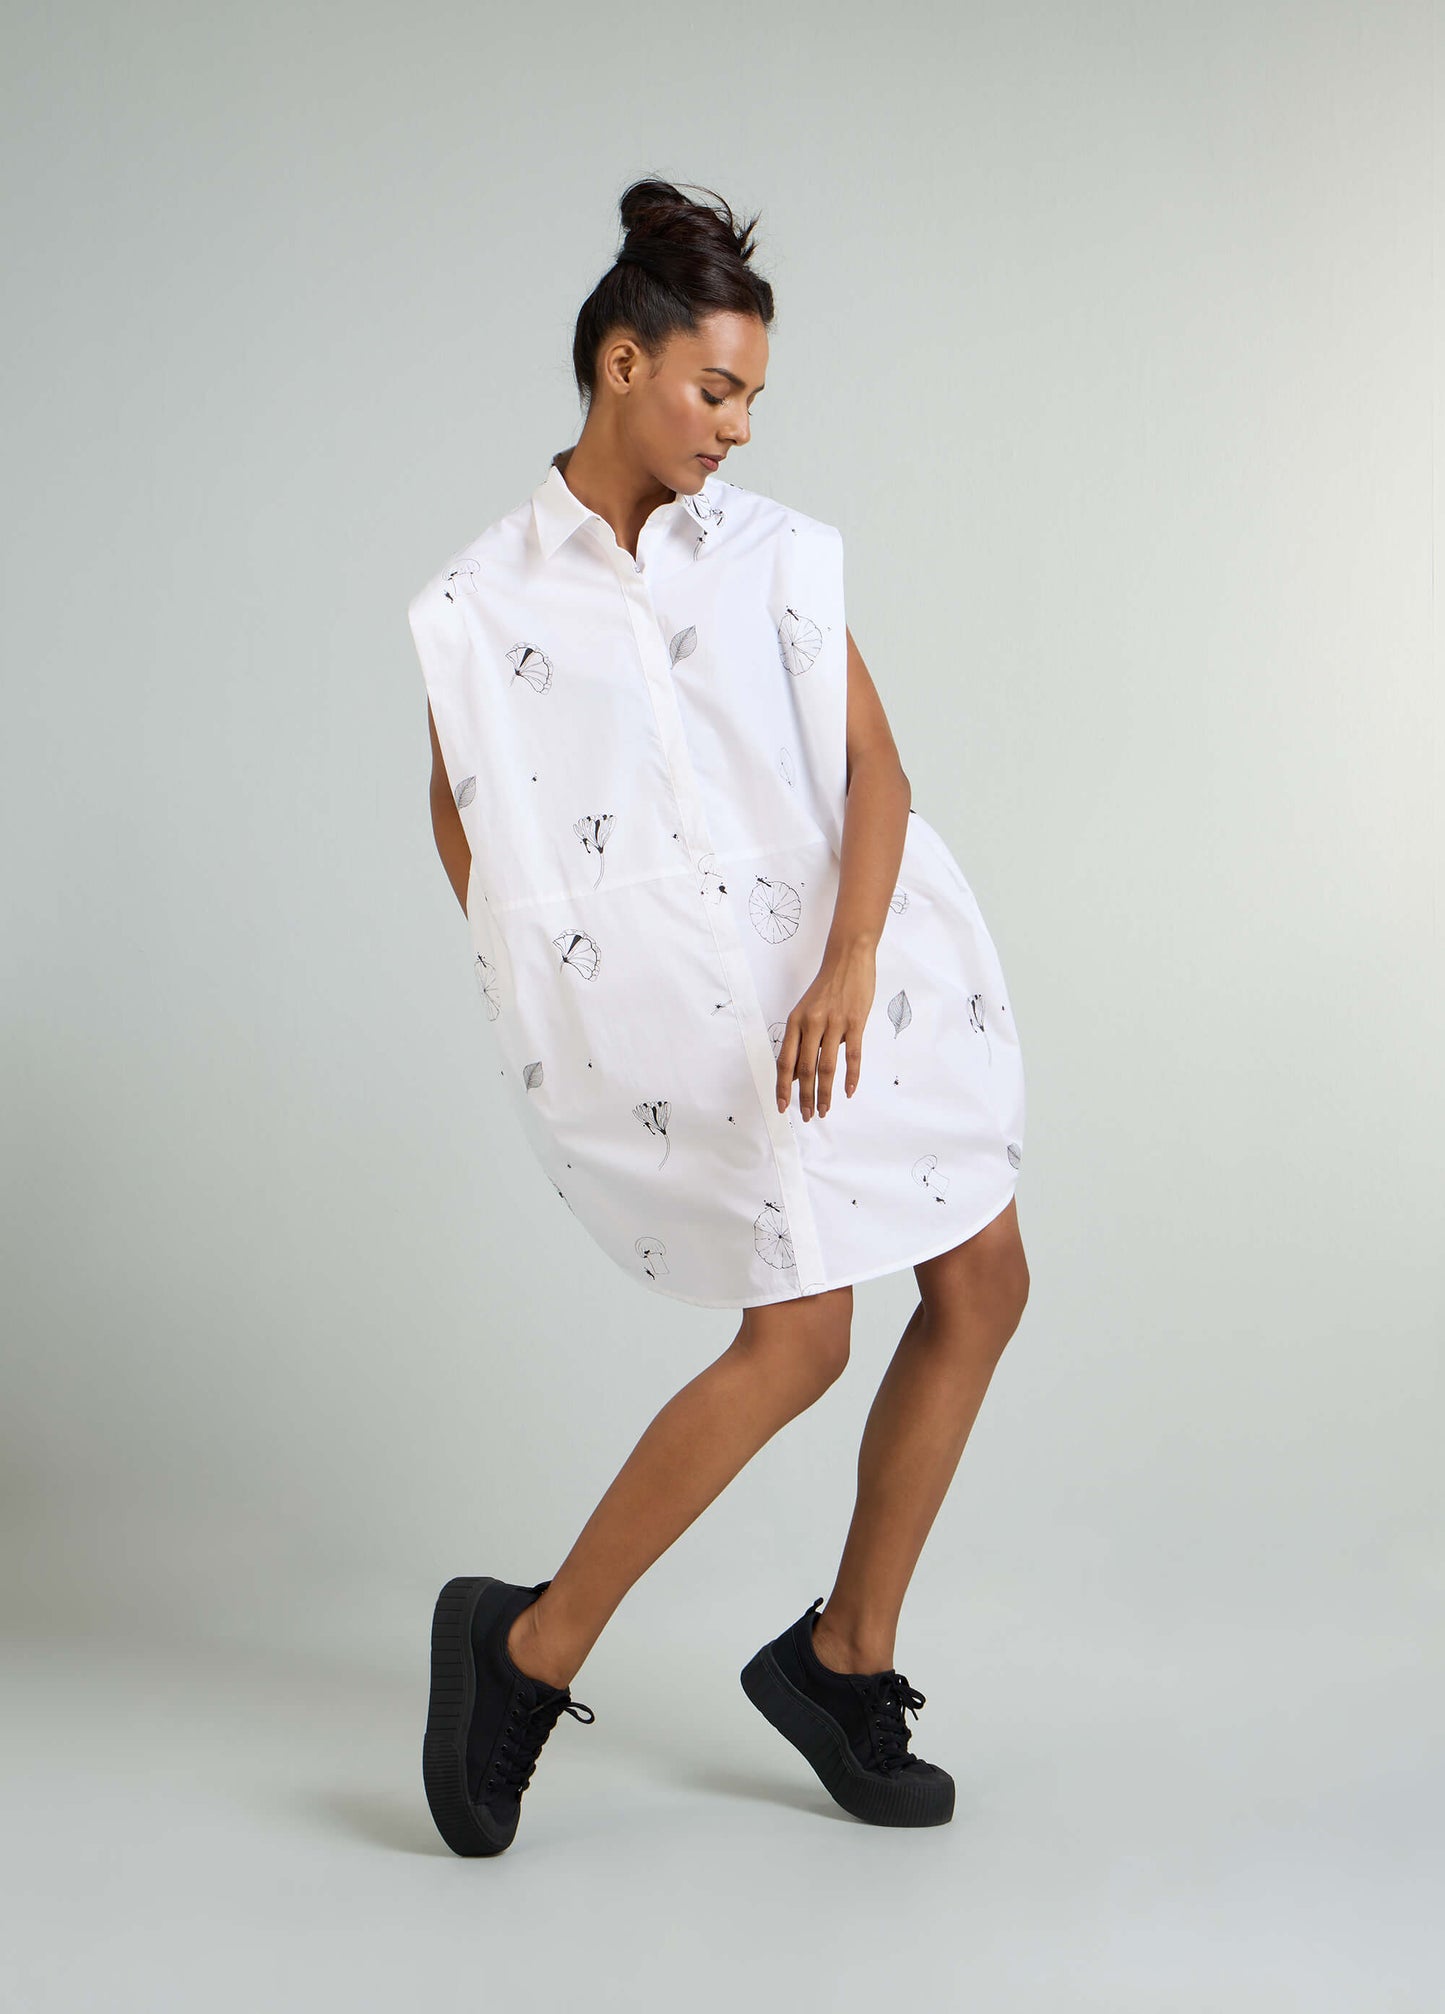 SLEVELESS DRESS WITH ROUNDED HEM AND SHOULDER PANEL